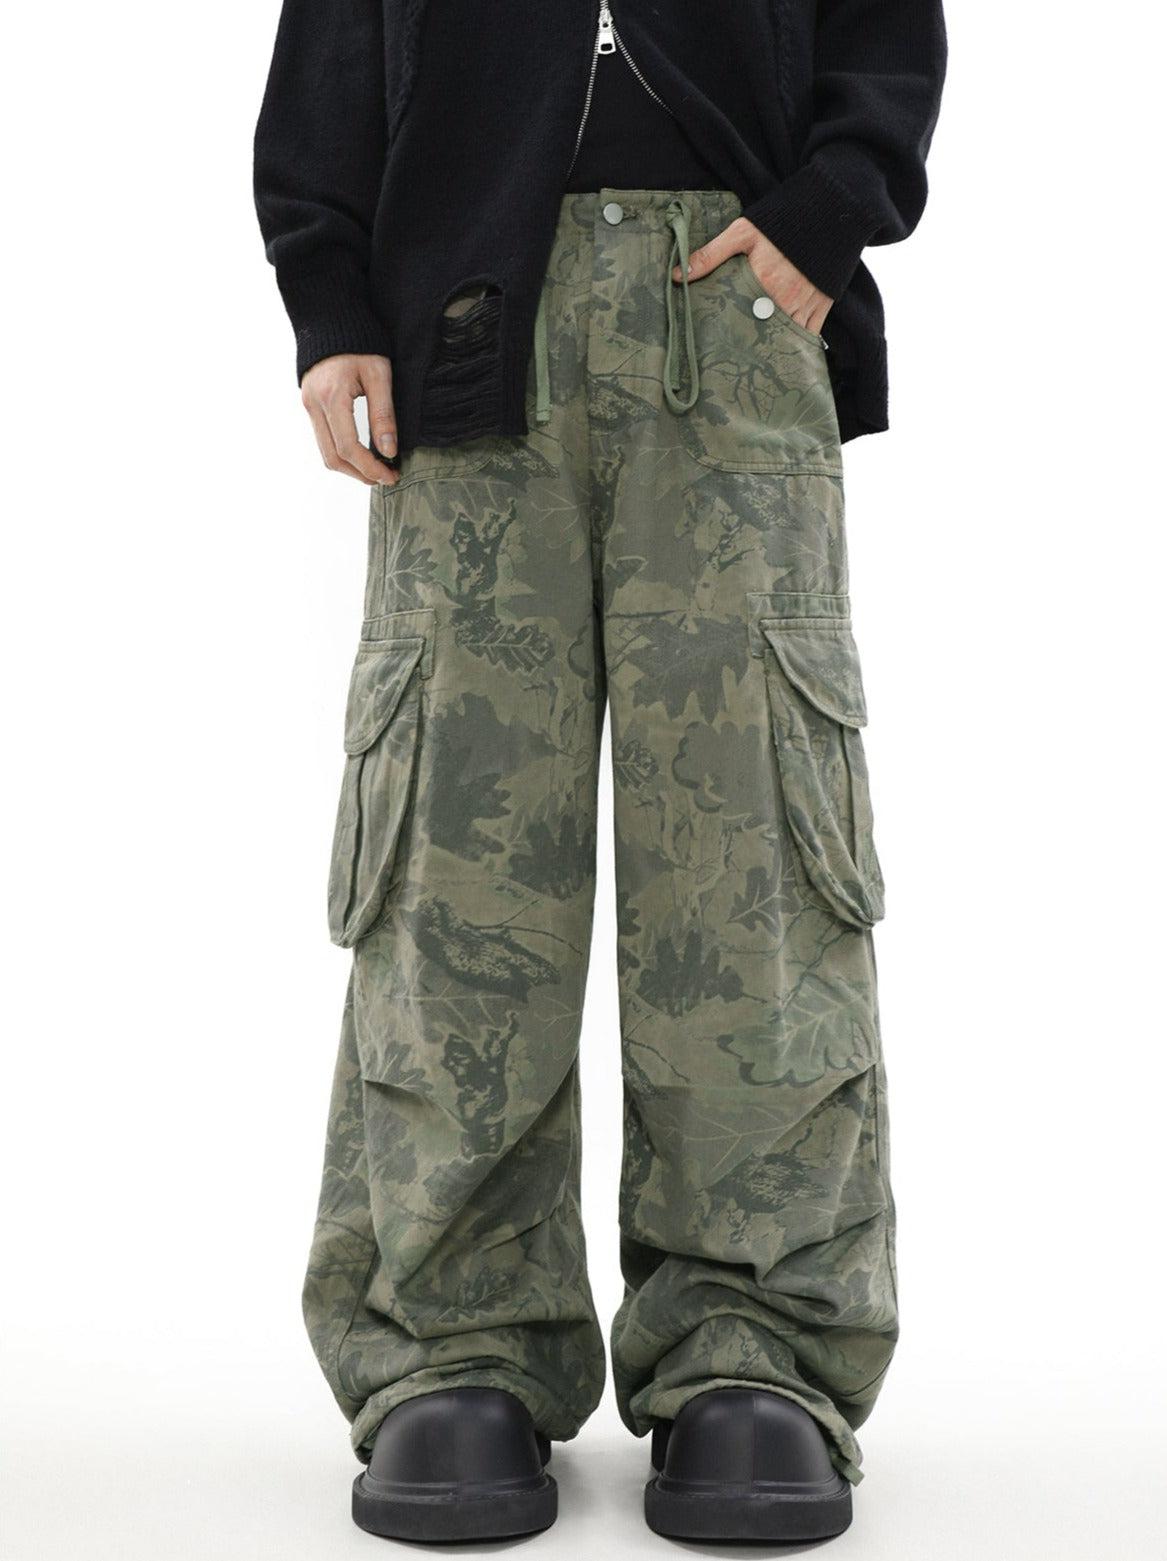 Leaf Camouflage Drawstring Cargo Pants Korean Street Fashion Pants By Mr Nearly Shop Online at OH Vault